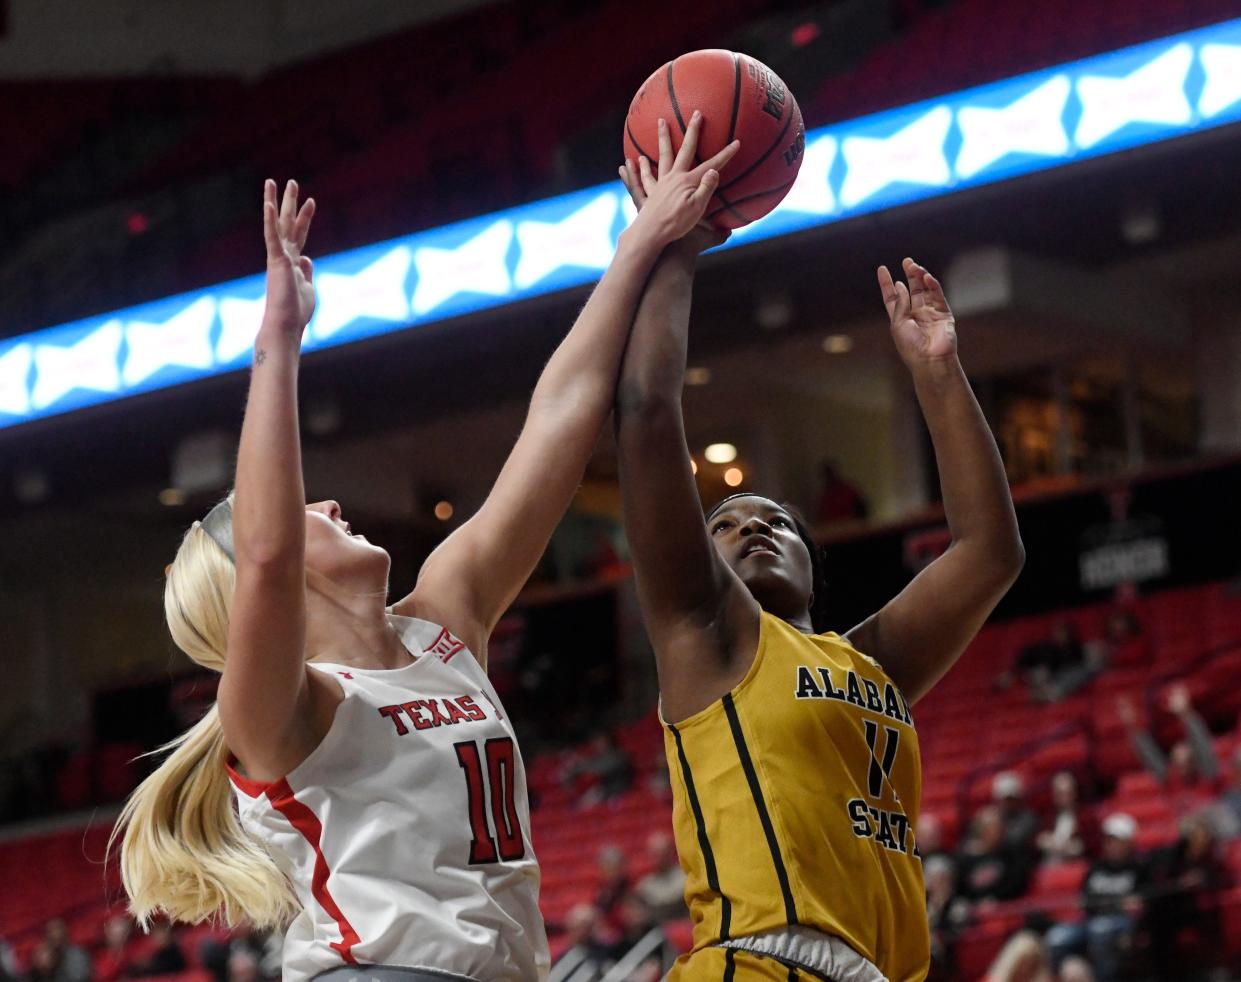 Texas Tech's forward Bryn Gerlich (10), left, attempts to block Alabama State's guard Samiya Steele's (11) layup in a non-conference basketball game, Thursday, Dec. 1, 2022, at United Supermarkets Arena.